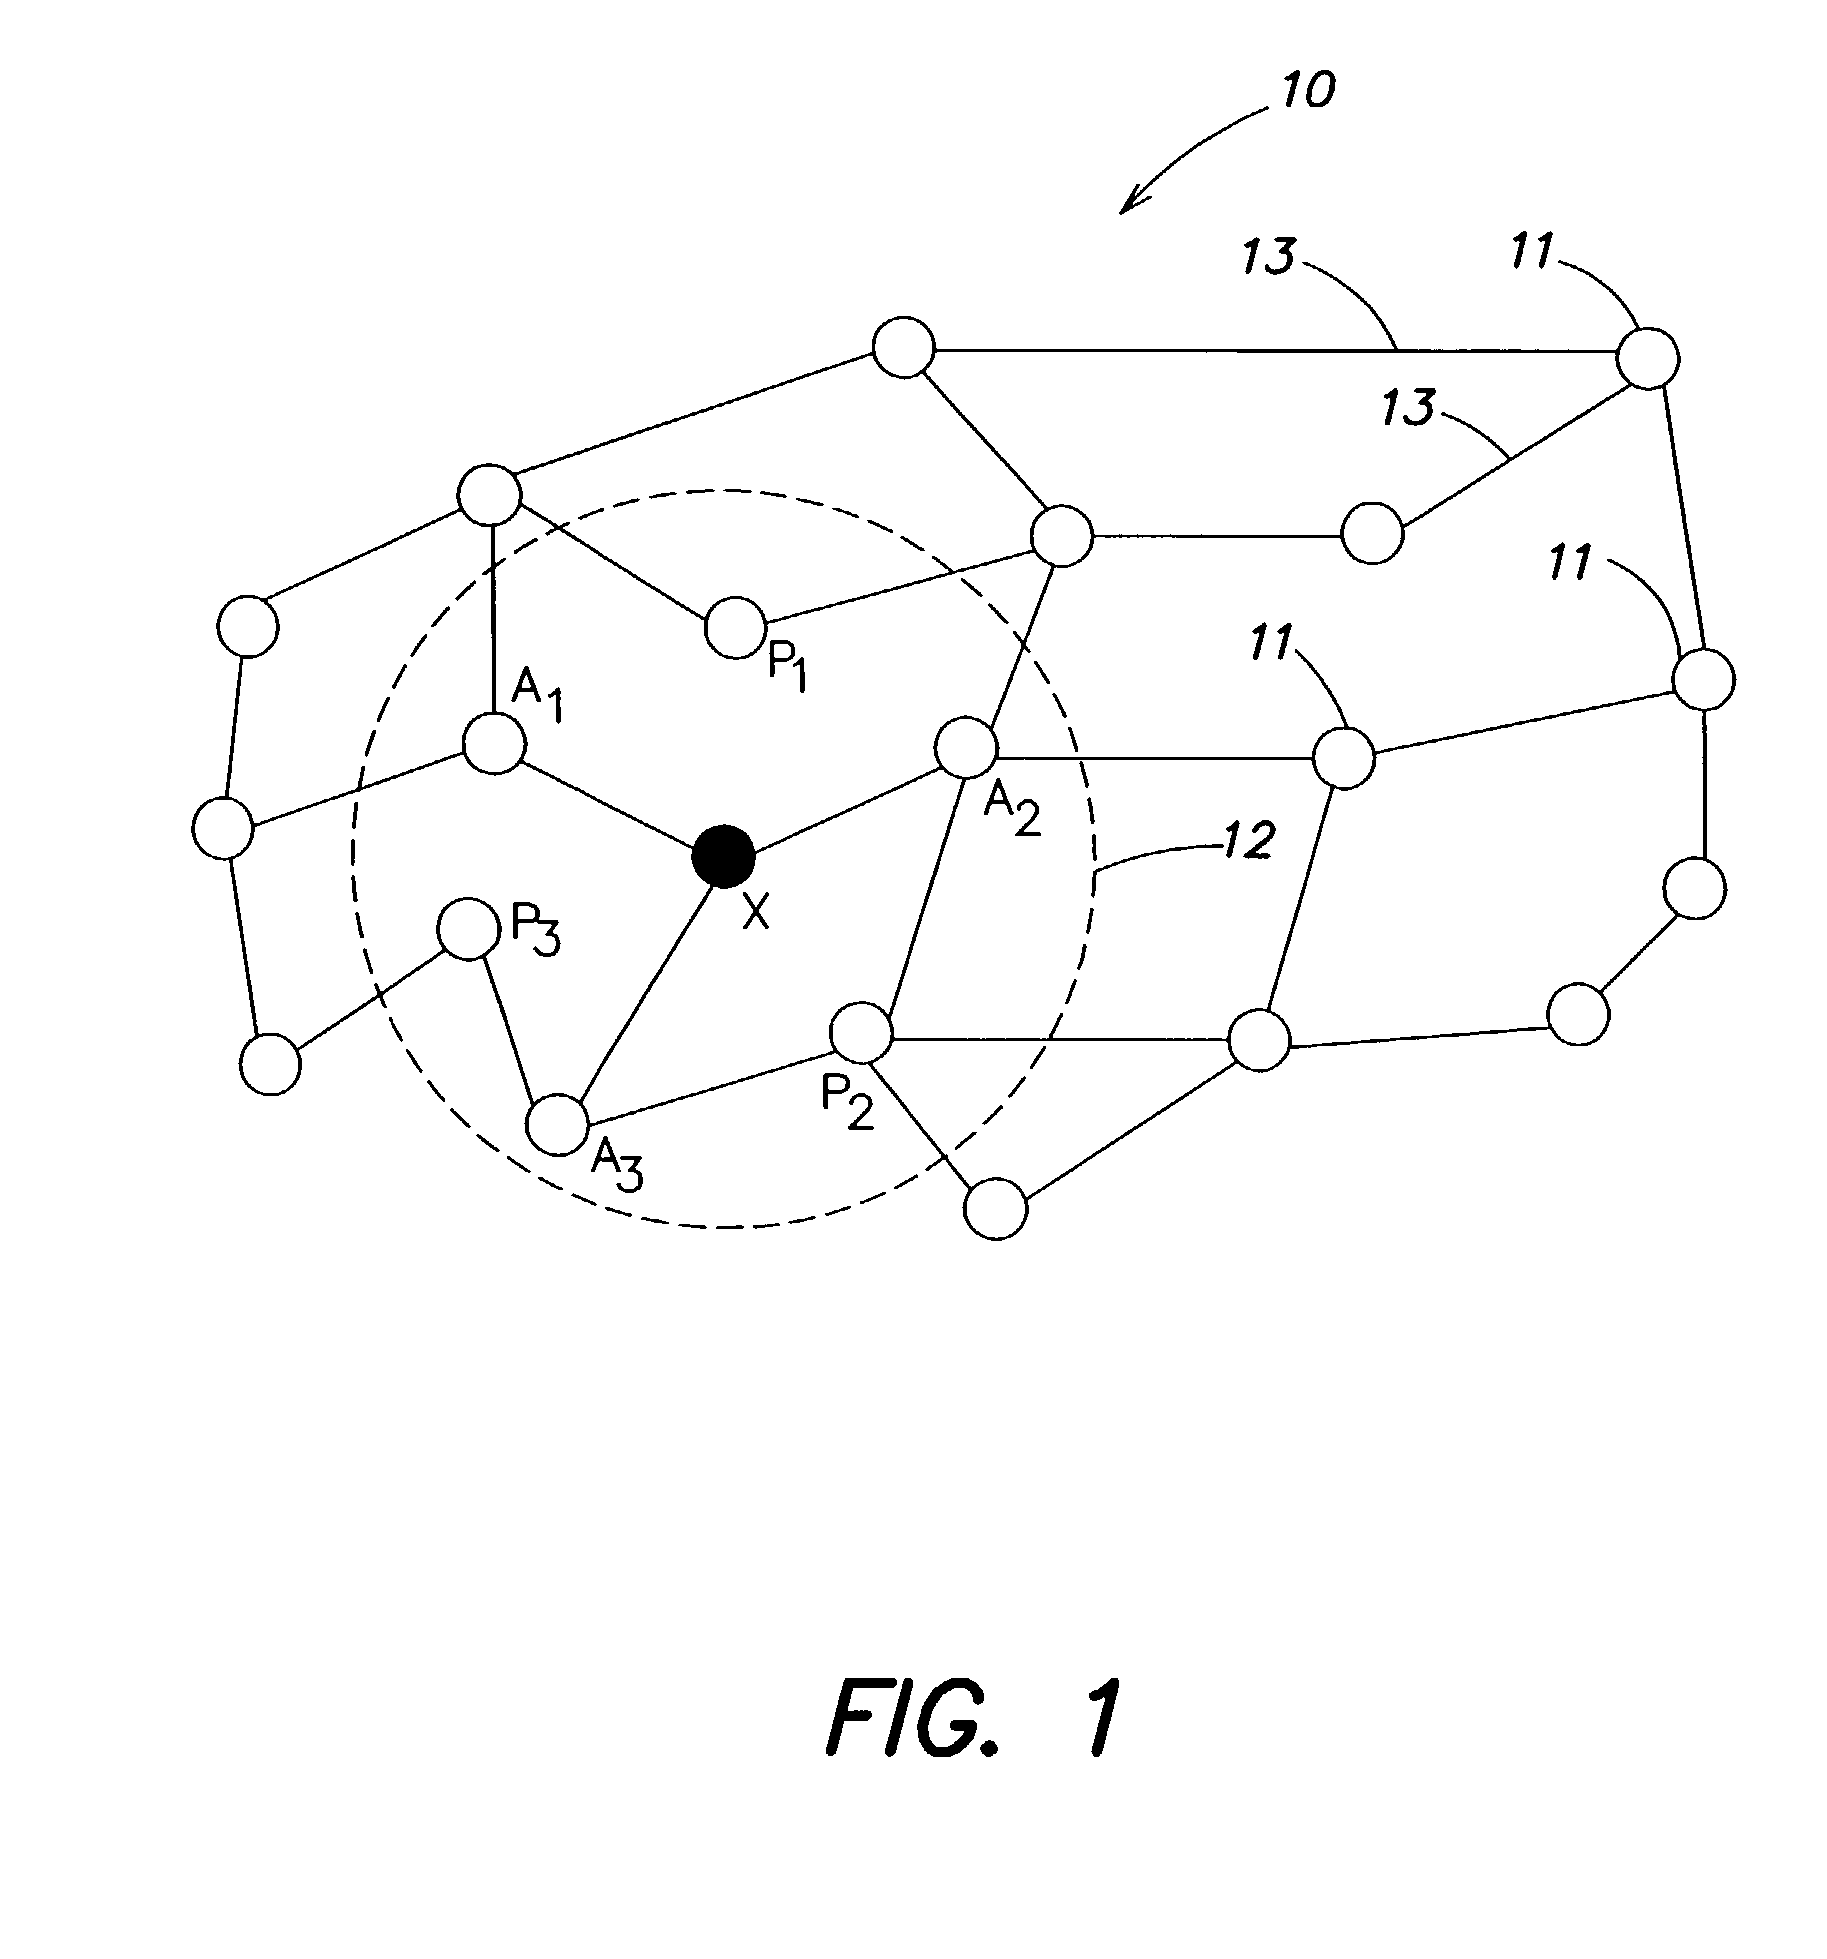 Method and apparatus for varying times/channels of broadcast beacons